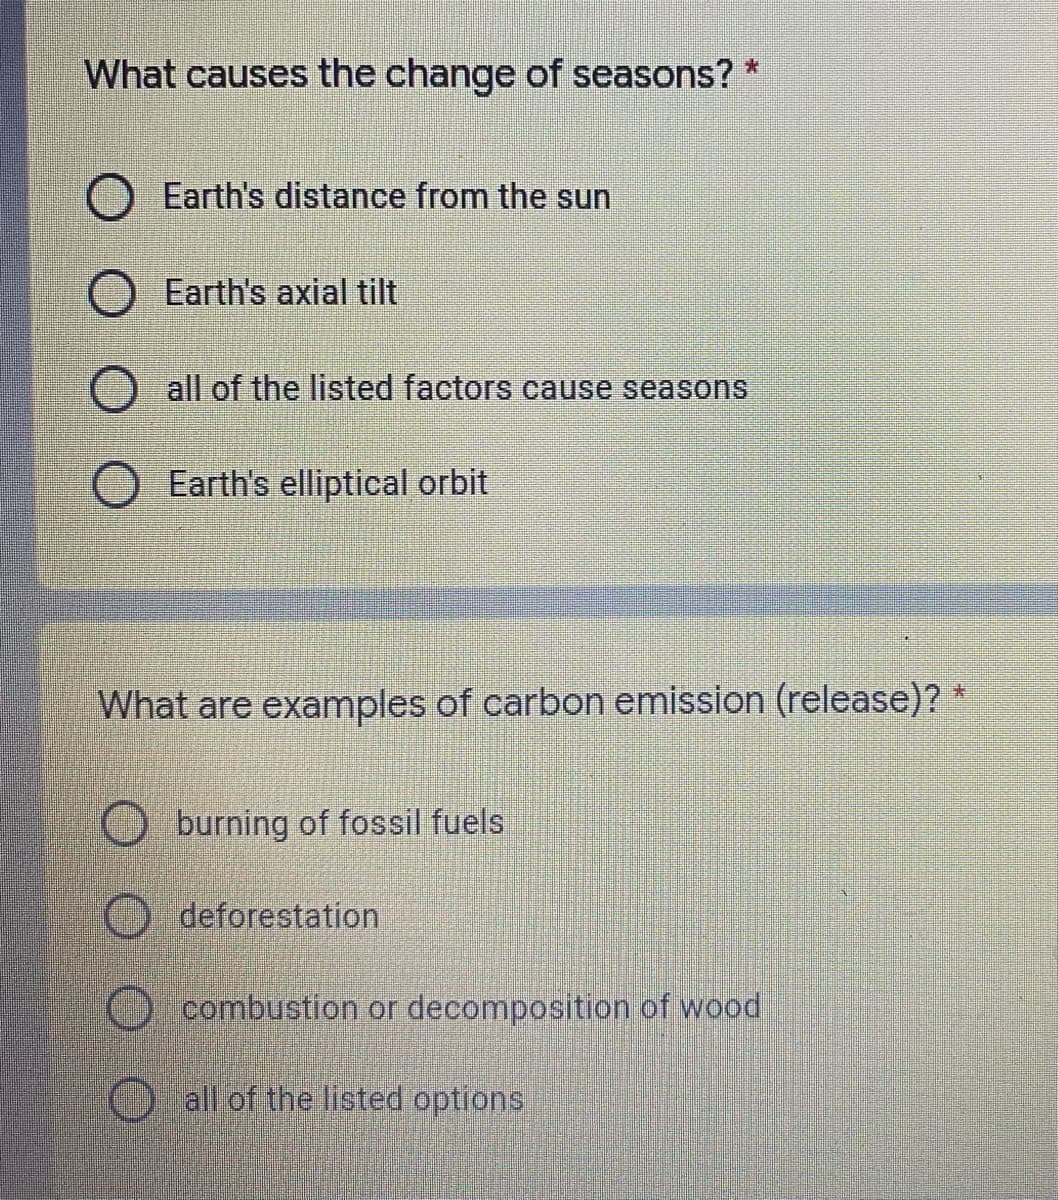 What causes the change of seasons? *
Earth's distance from the sun
Earth's axial tilt
all of the listed factors cause seasons
Earth's elliptical orbit
What are examples of carbon emission (release)? *
burning of fossil fuels
deforestation
combustion or decomposition of wood
O all of the listed options
